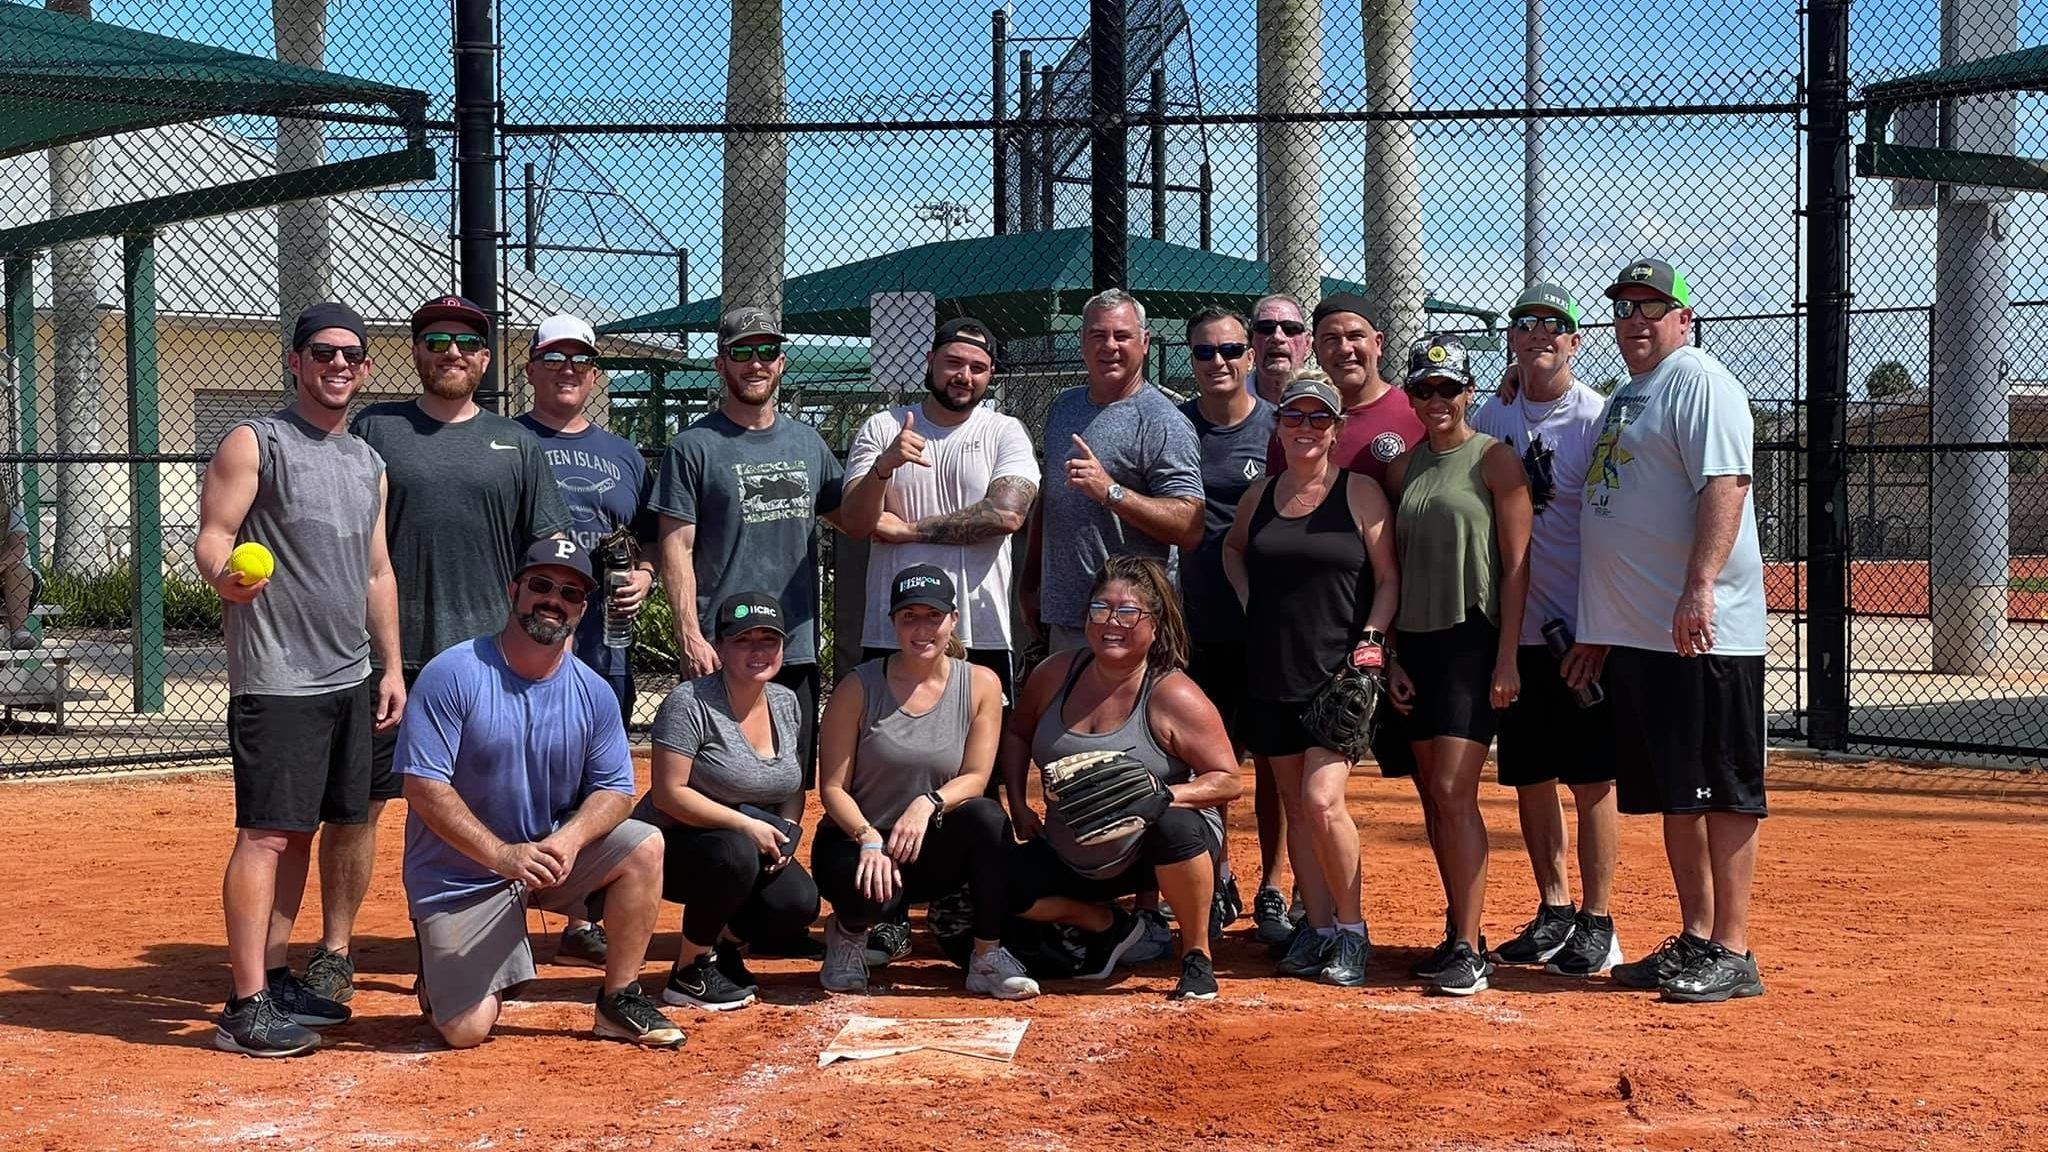 Register Now For Co-Ed Adult Softball League in Parkland